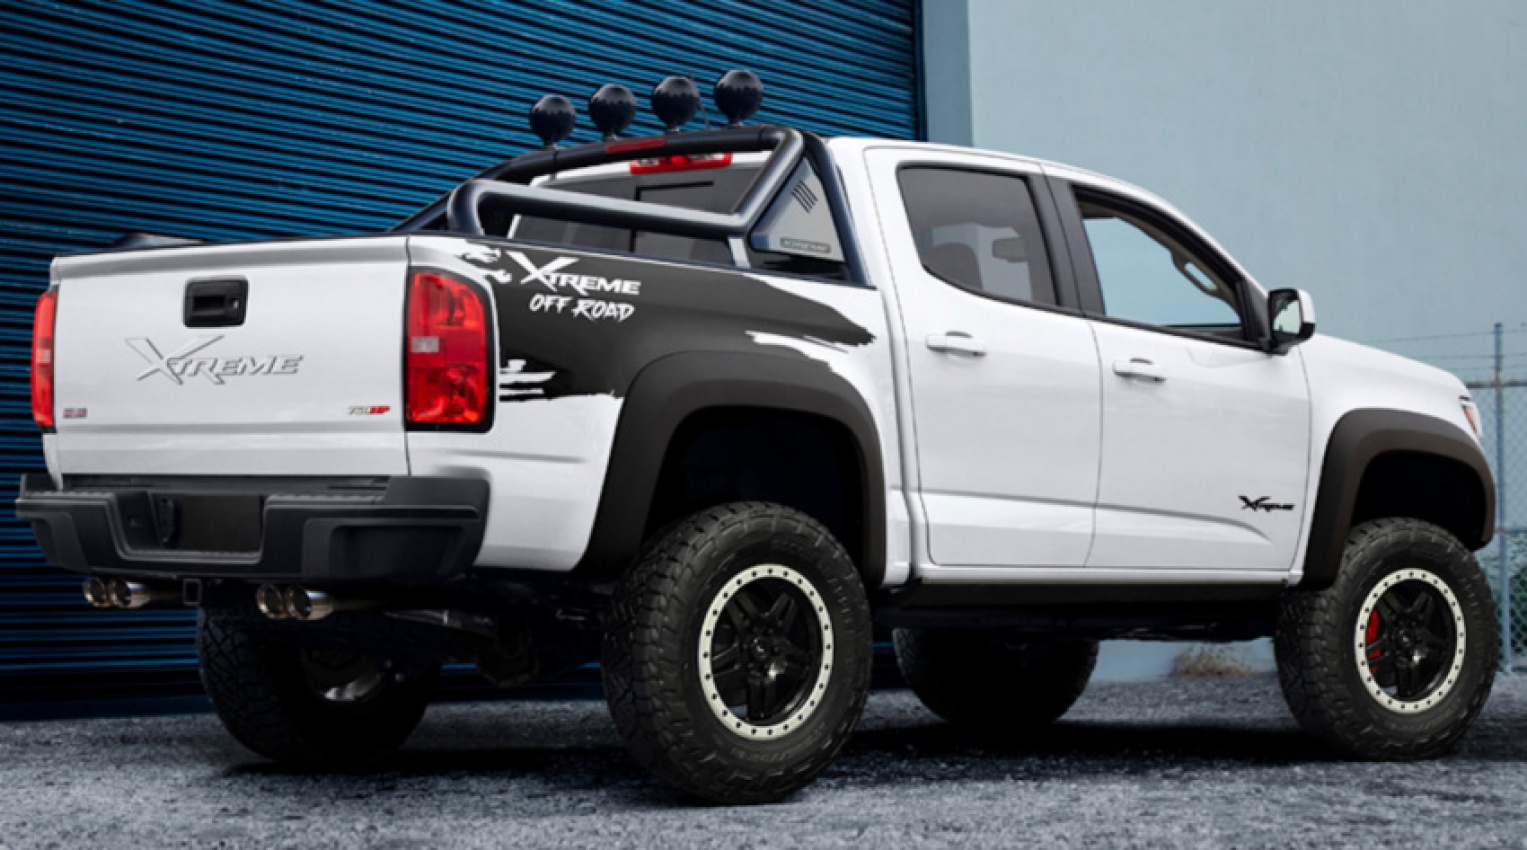 autos, cars, chevrolet, hp, chevrolet colorado, chevrolet colorado news, chevrolet news, modified, off-road, pickup trucks, specialty vehicle engineering, sve 2022 chevrolet colorado zr2 xtreme off-road packs 750 hp to tackle trxs